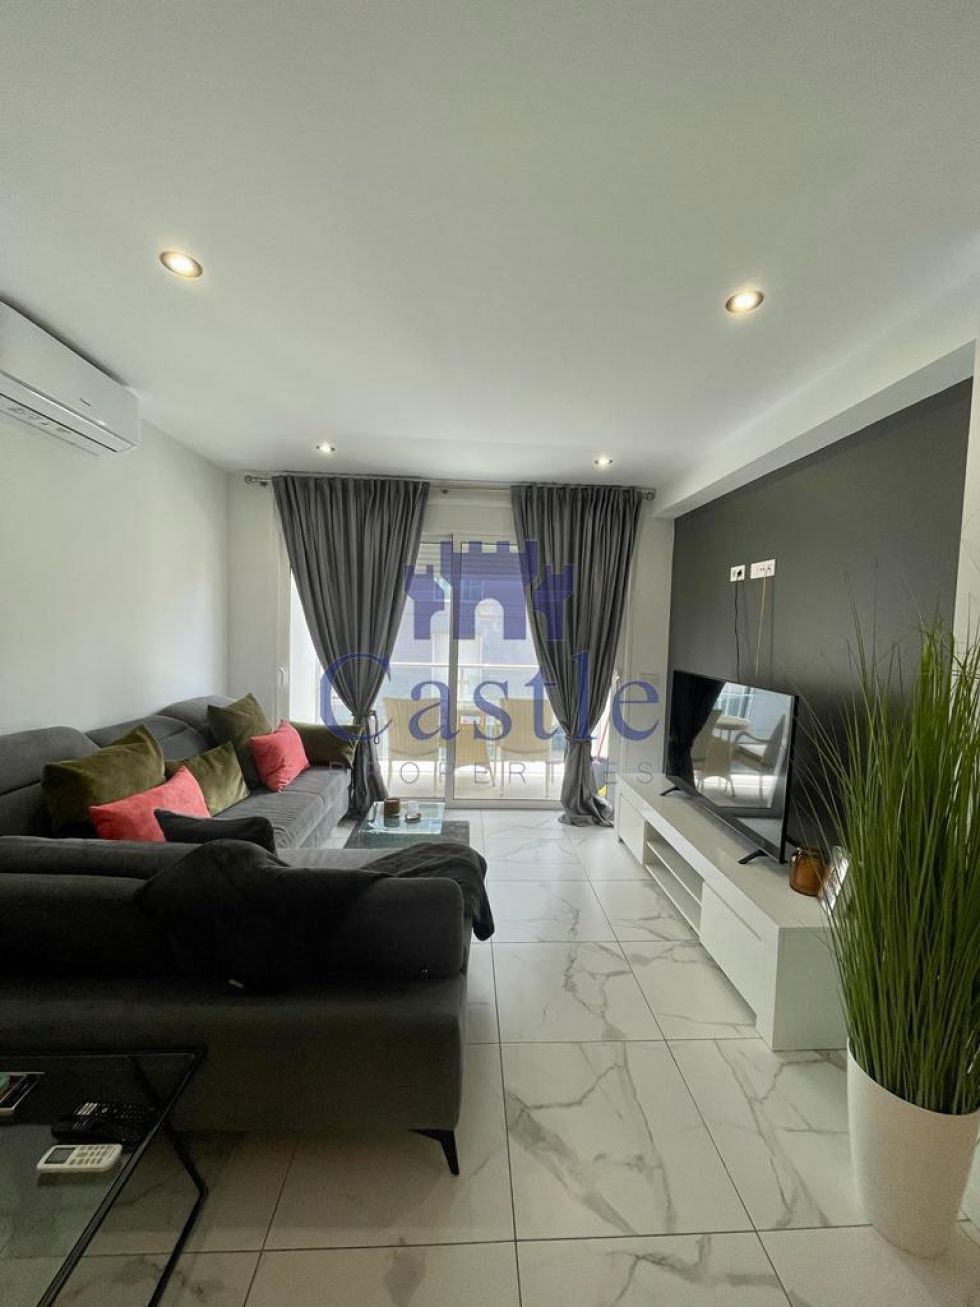 Apartment for sale in  Adeje, Spain - 24444